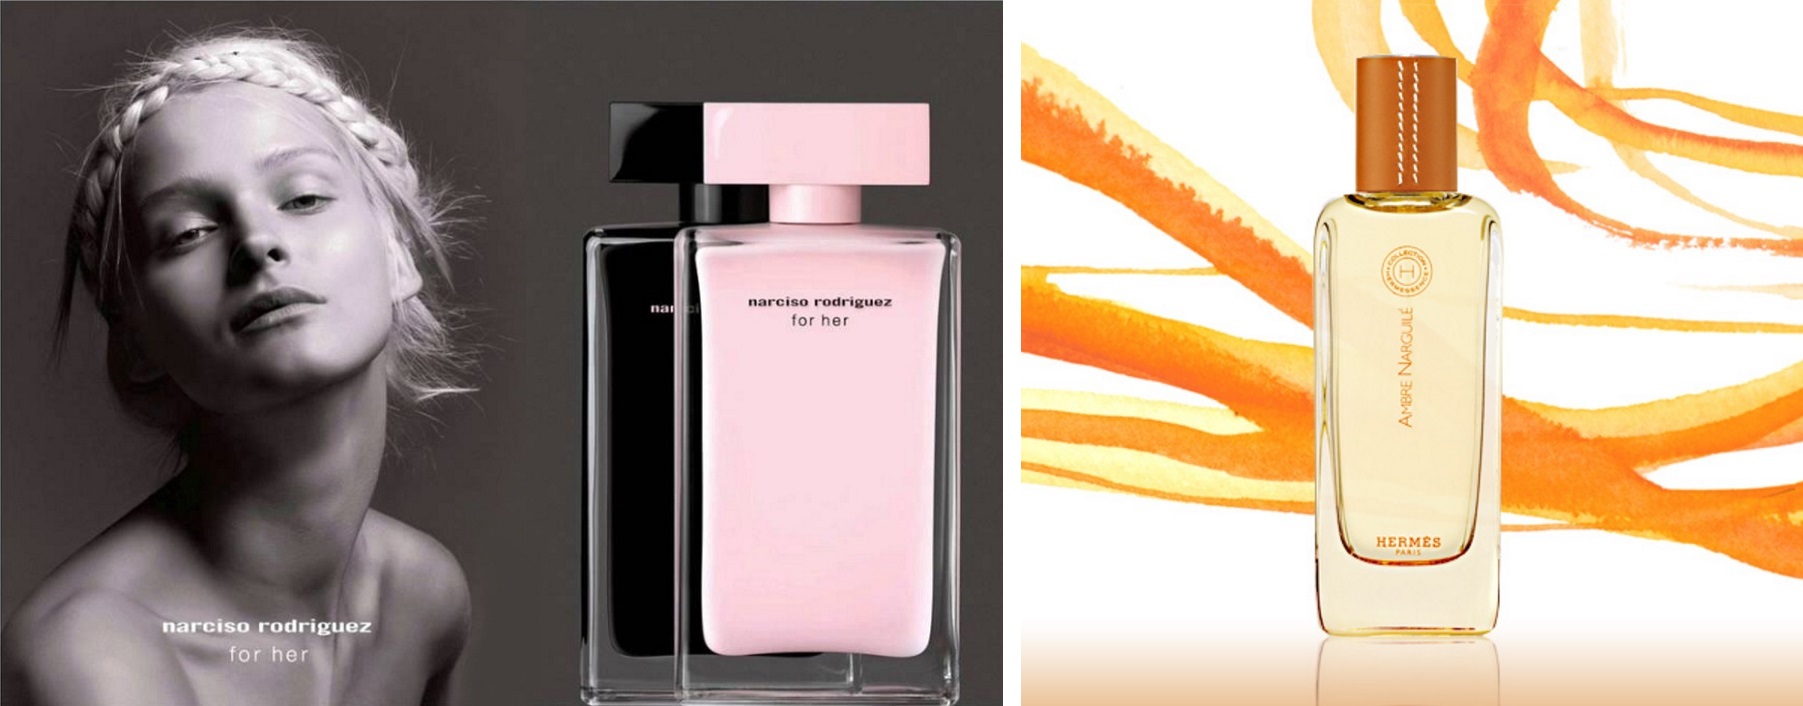 narciso rodriguez for her pub modifiee